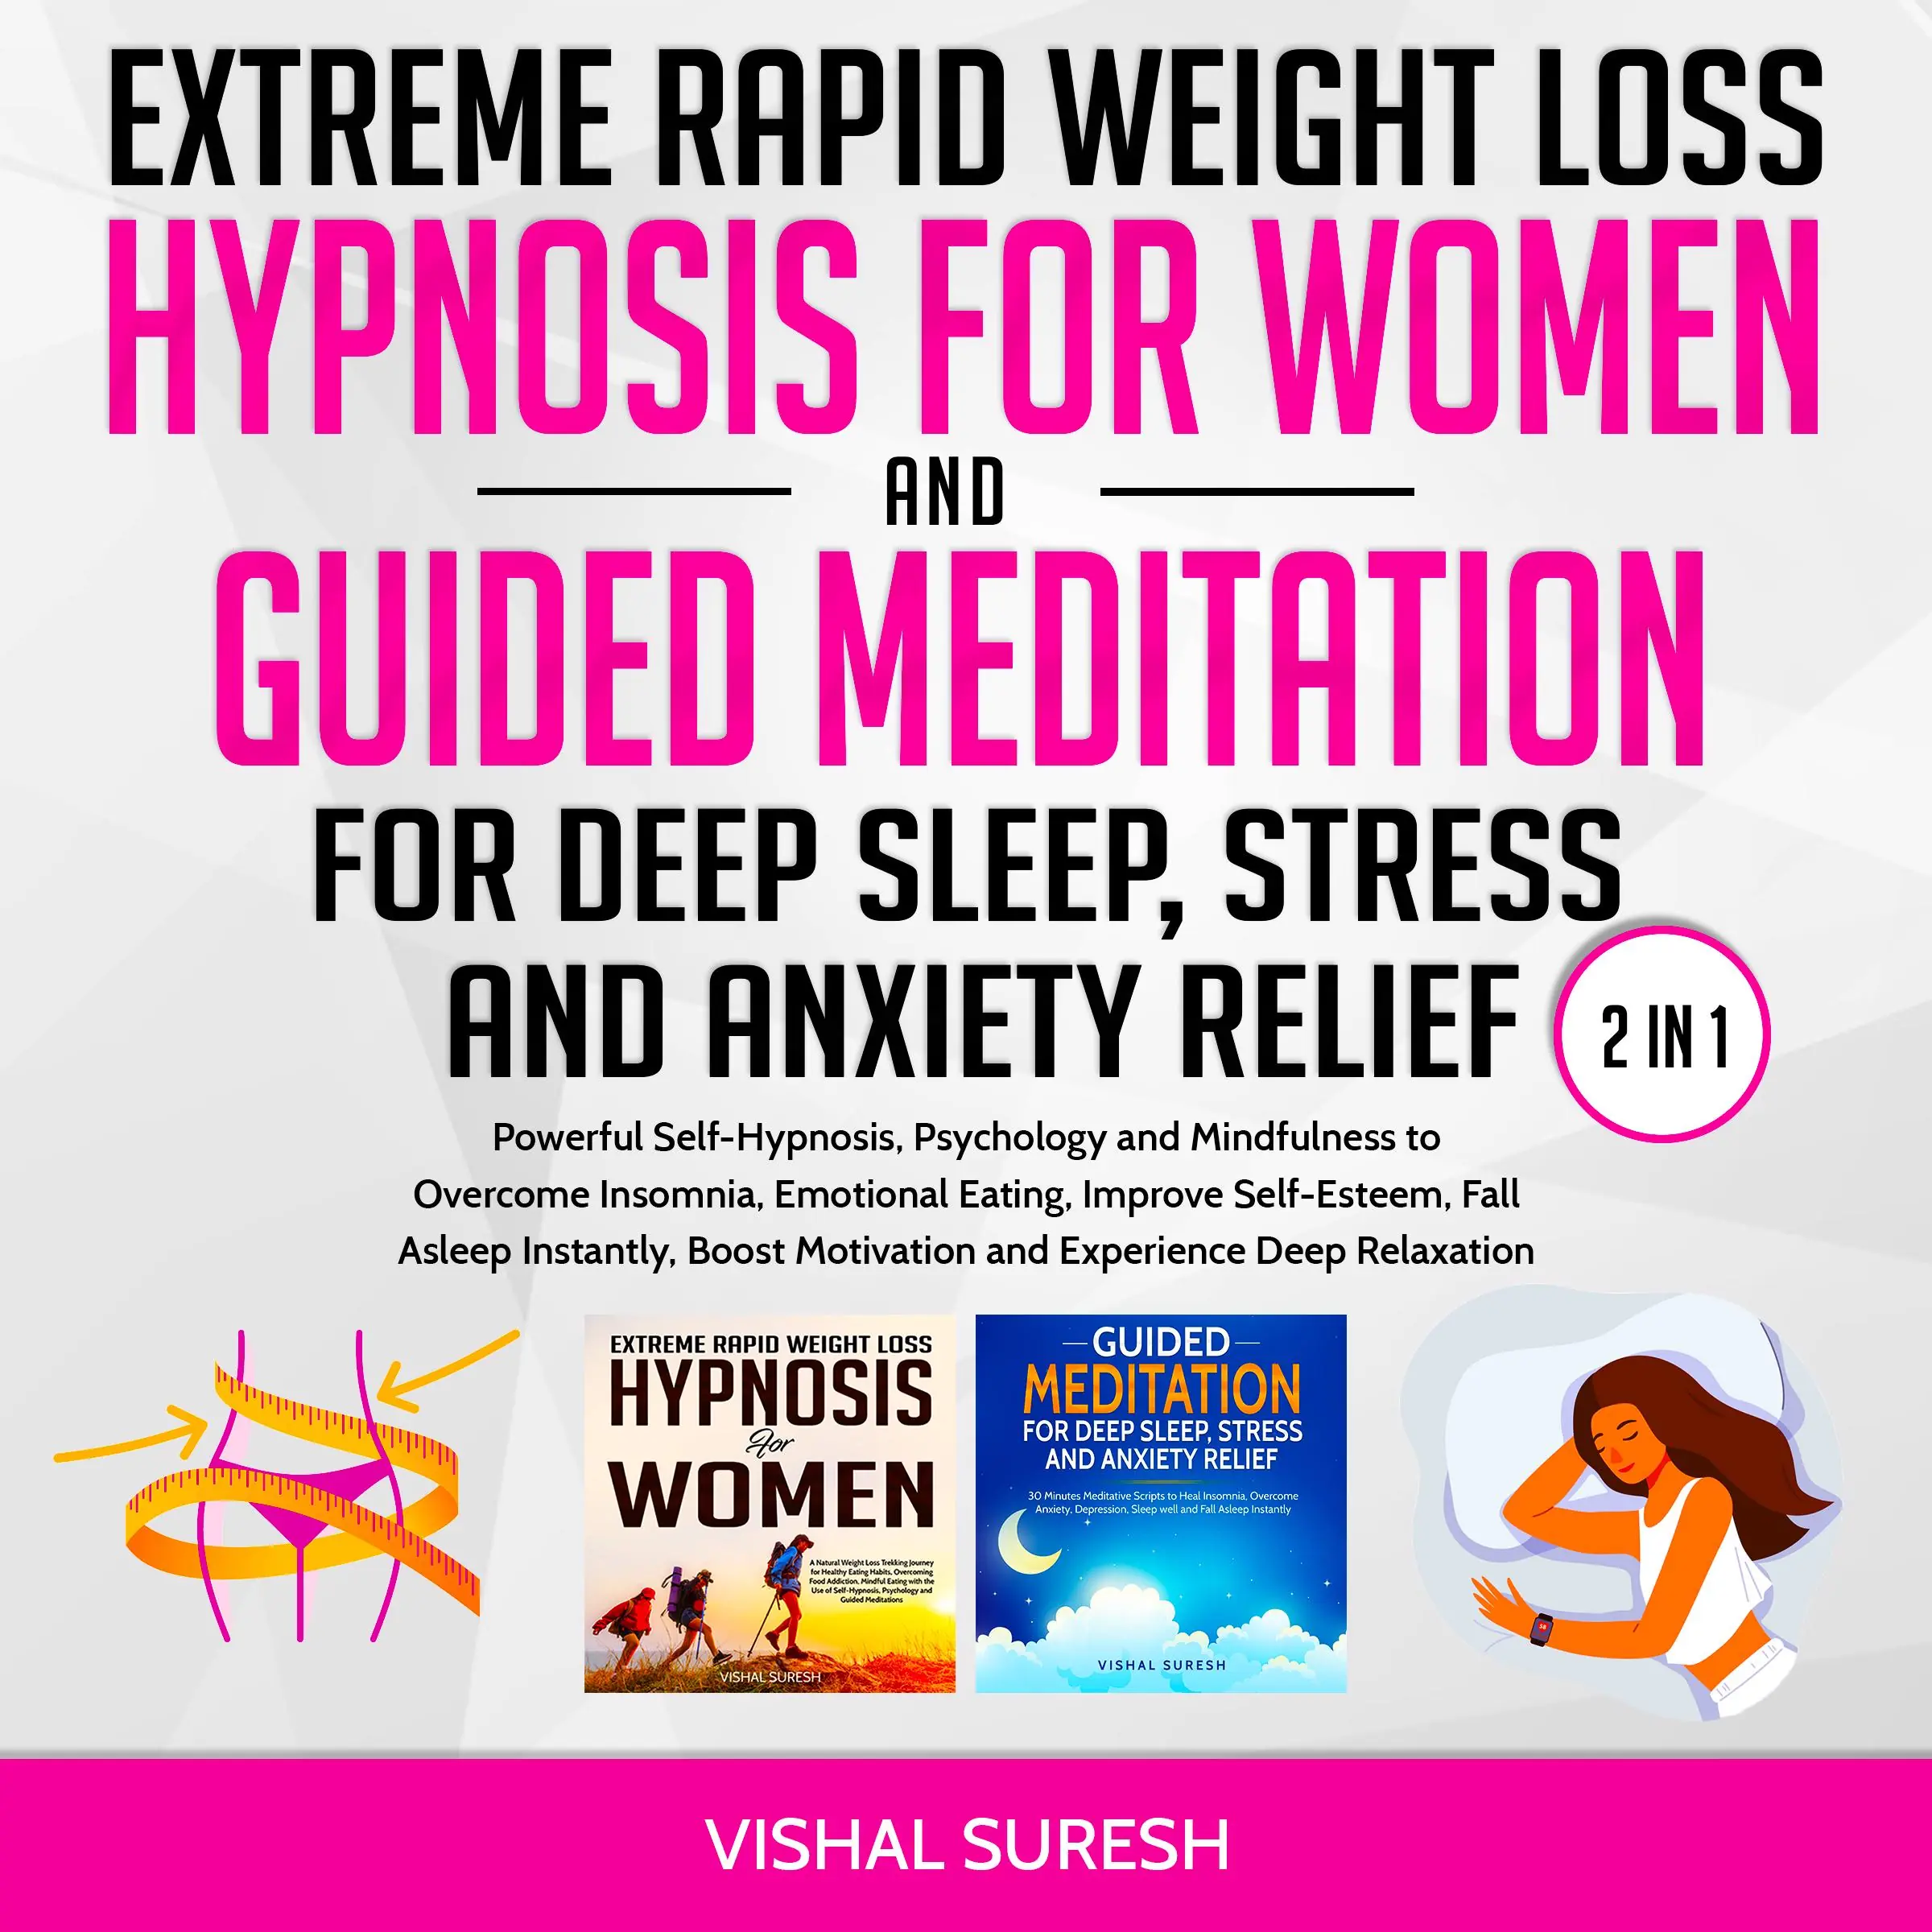 Extreme Rapid Weight Loss Hypnosis for Women and Guided Meditation for Deep Sleep, Stress and Anxiety Relief 2 in 1 Audiobook by Vishal Suresh